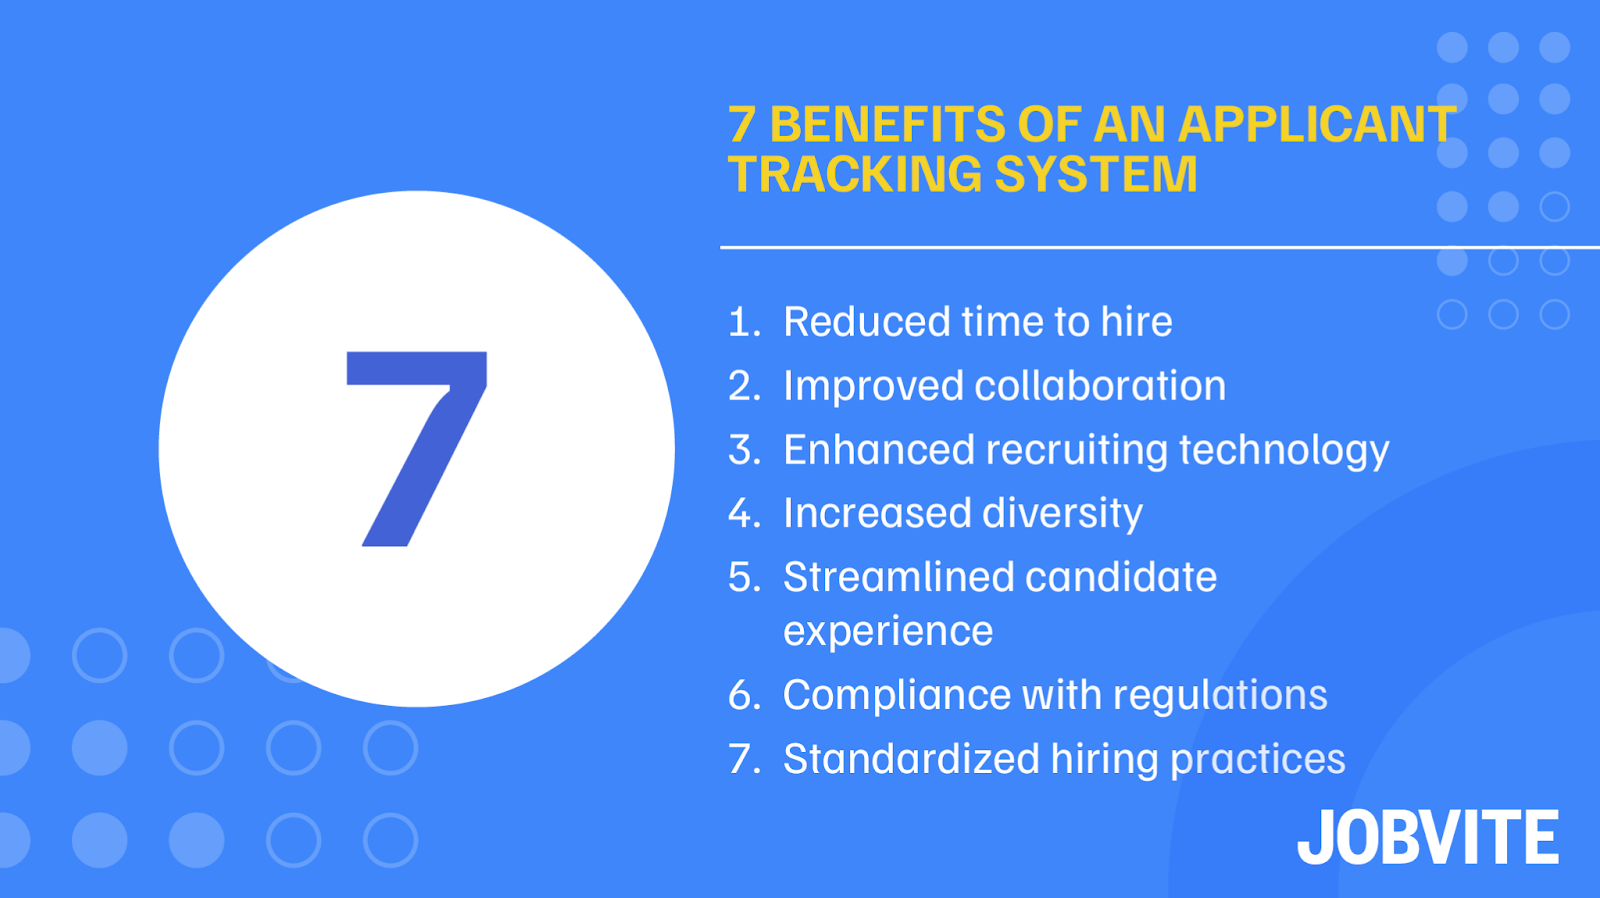 The benefits of an applicant tracking system (as explained below).